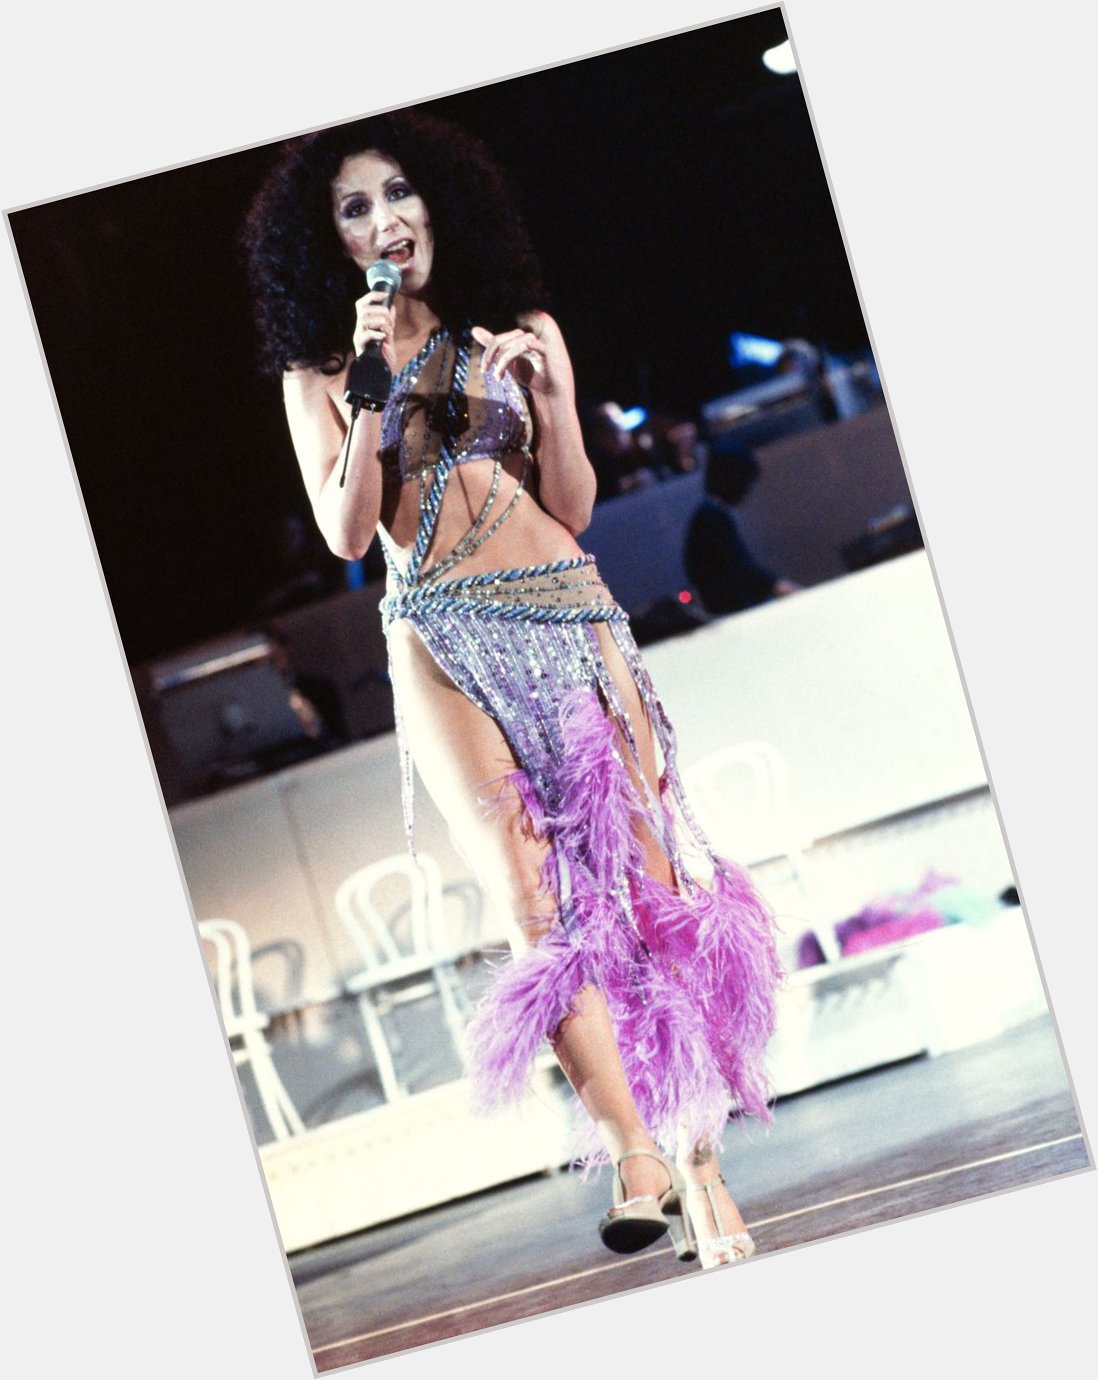 Happy 75th birthday, Cher! We re looking back at some of her best outfits in her honor  